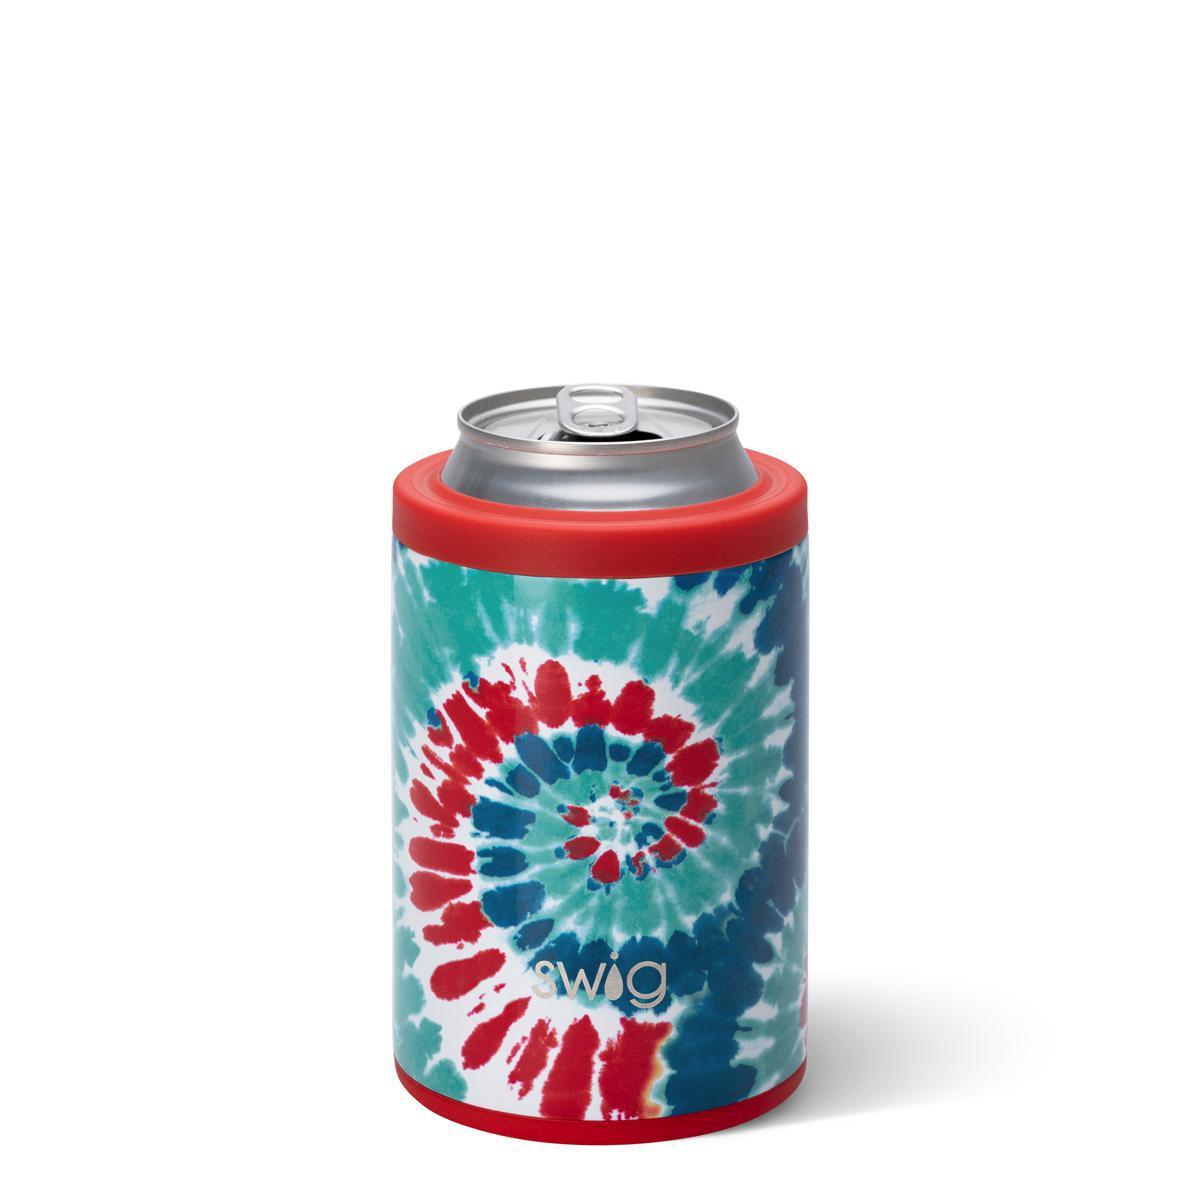 Swig Skinny Can Cooler - Spot On (Personalization Available)